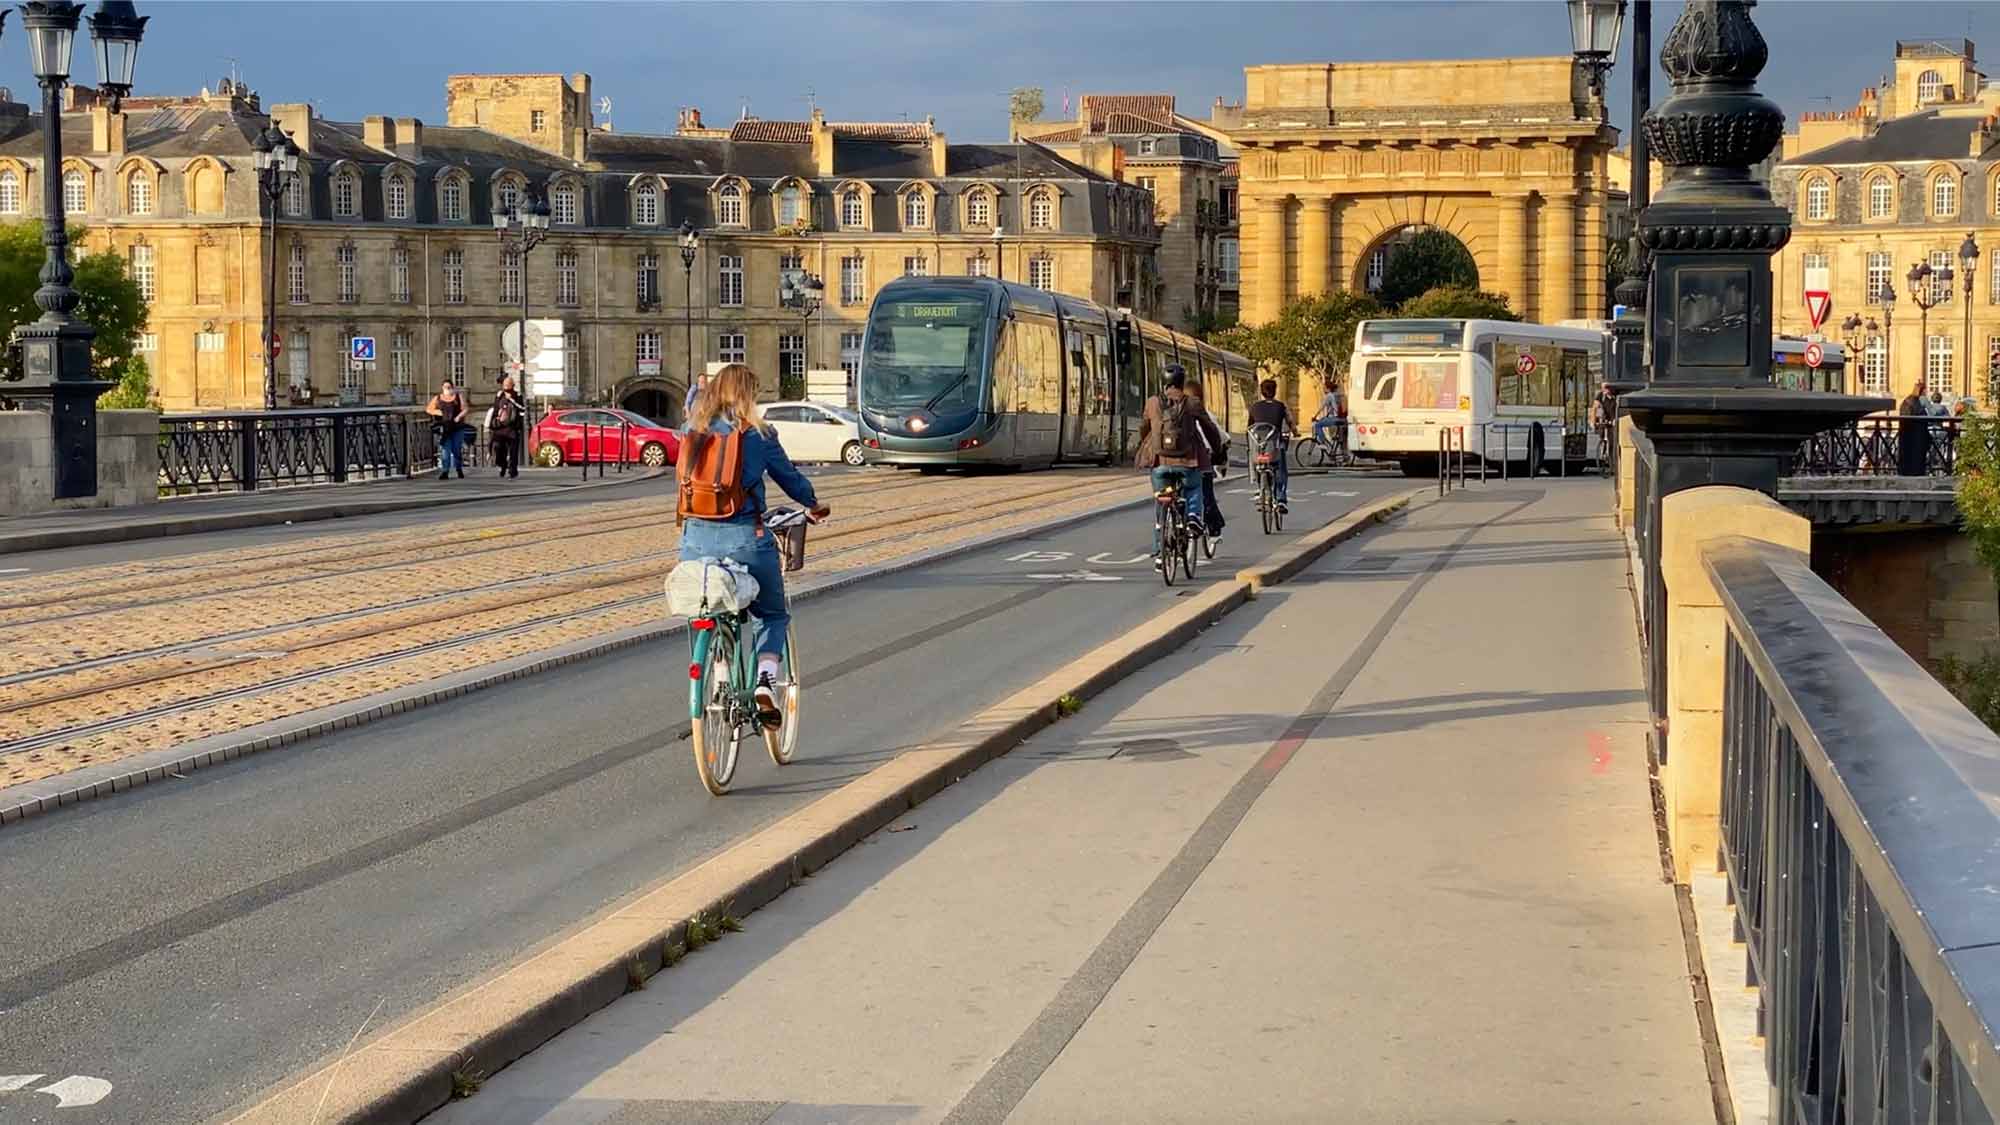 Metro line and cyclists in the city of Bordeaux - planning mobility and connectivity is an area of specialism